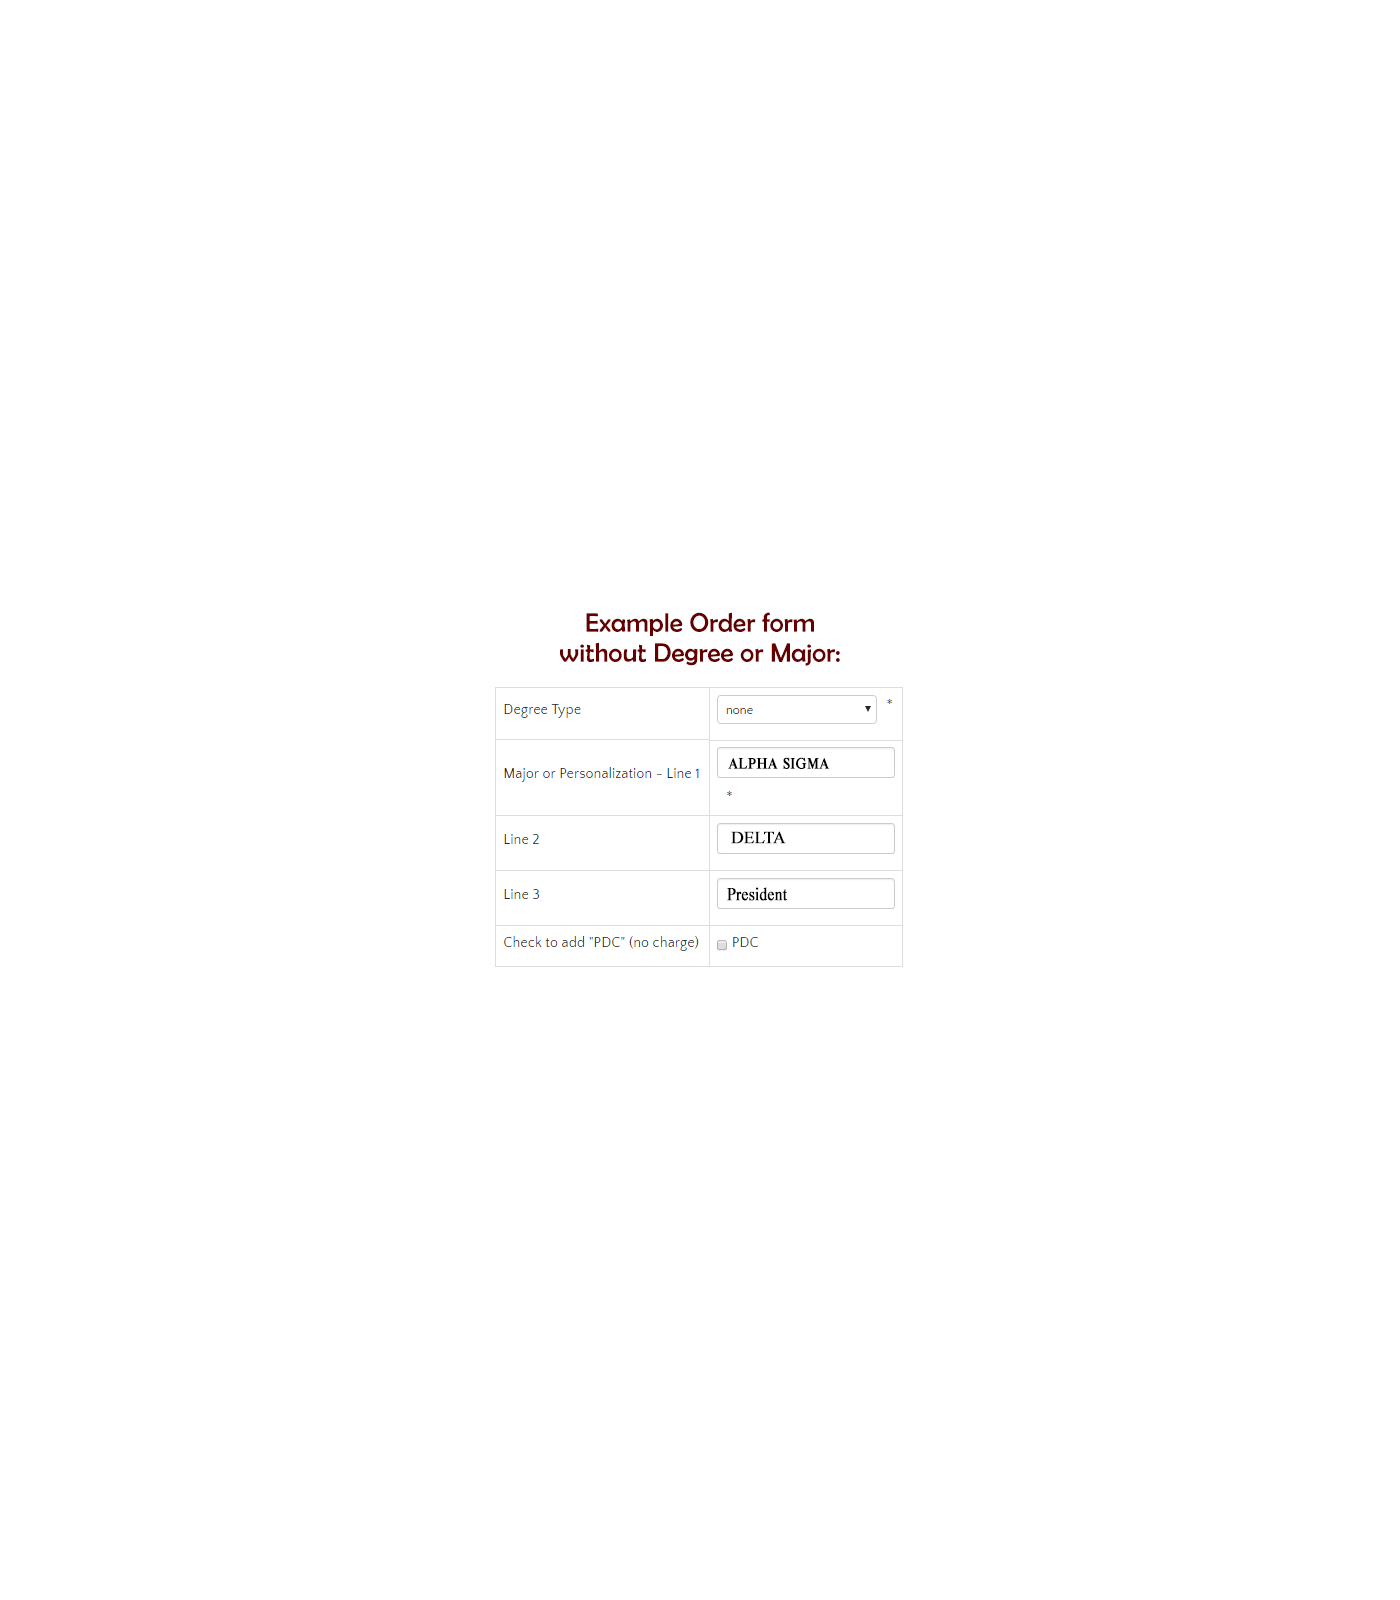 example_order_form_without_degree_or_major_402976362